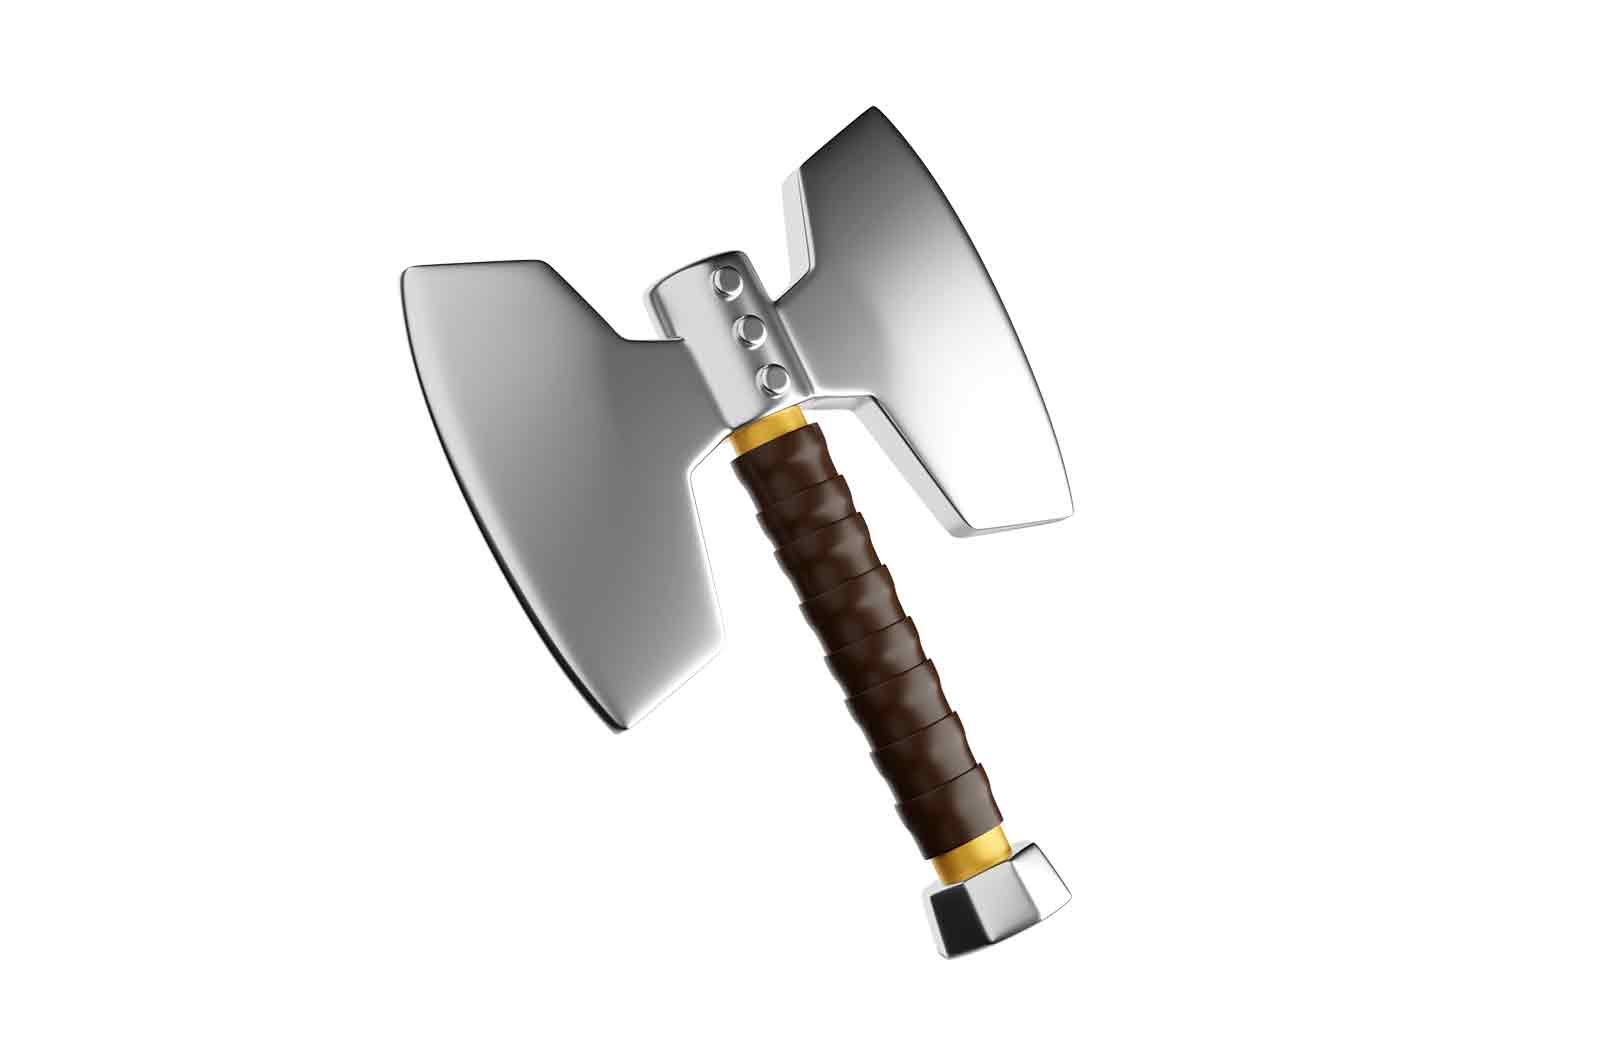 Double-headed axe, 3d rendered illustration. Symbol of power, violence, or destruction.